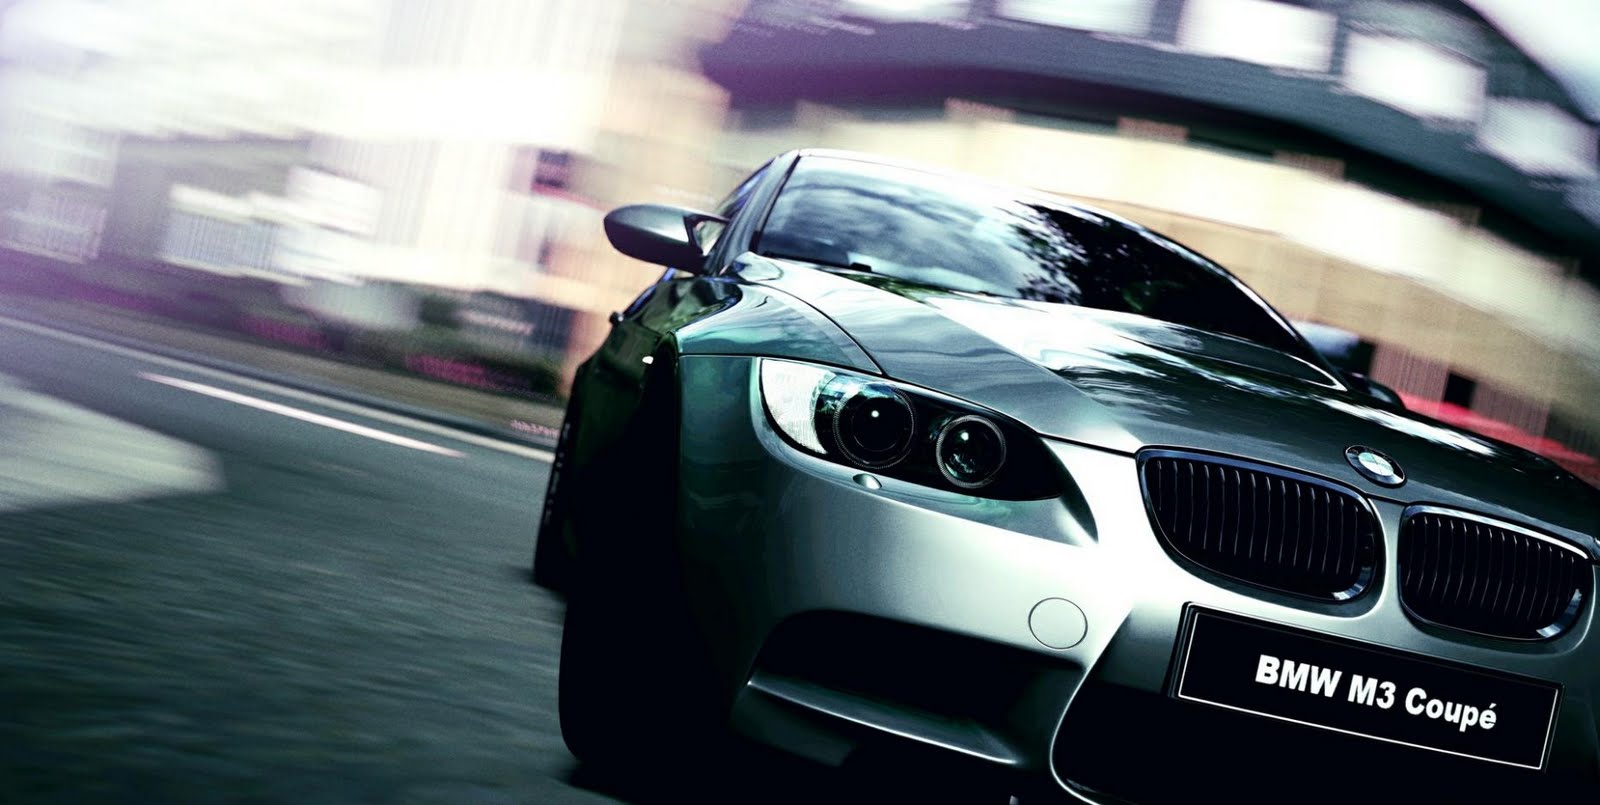 Bmw Hd Wallpapers 1080p For Mobile